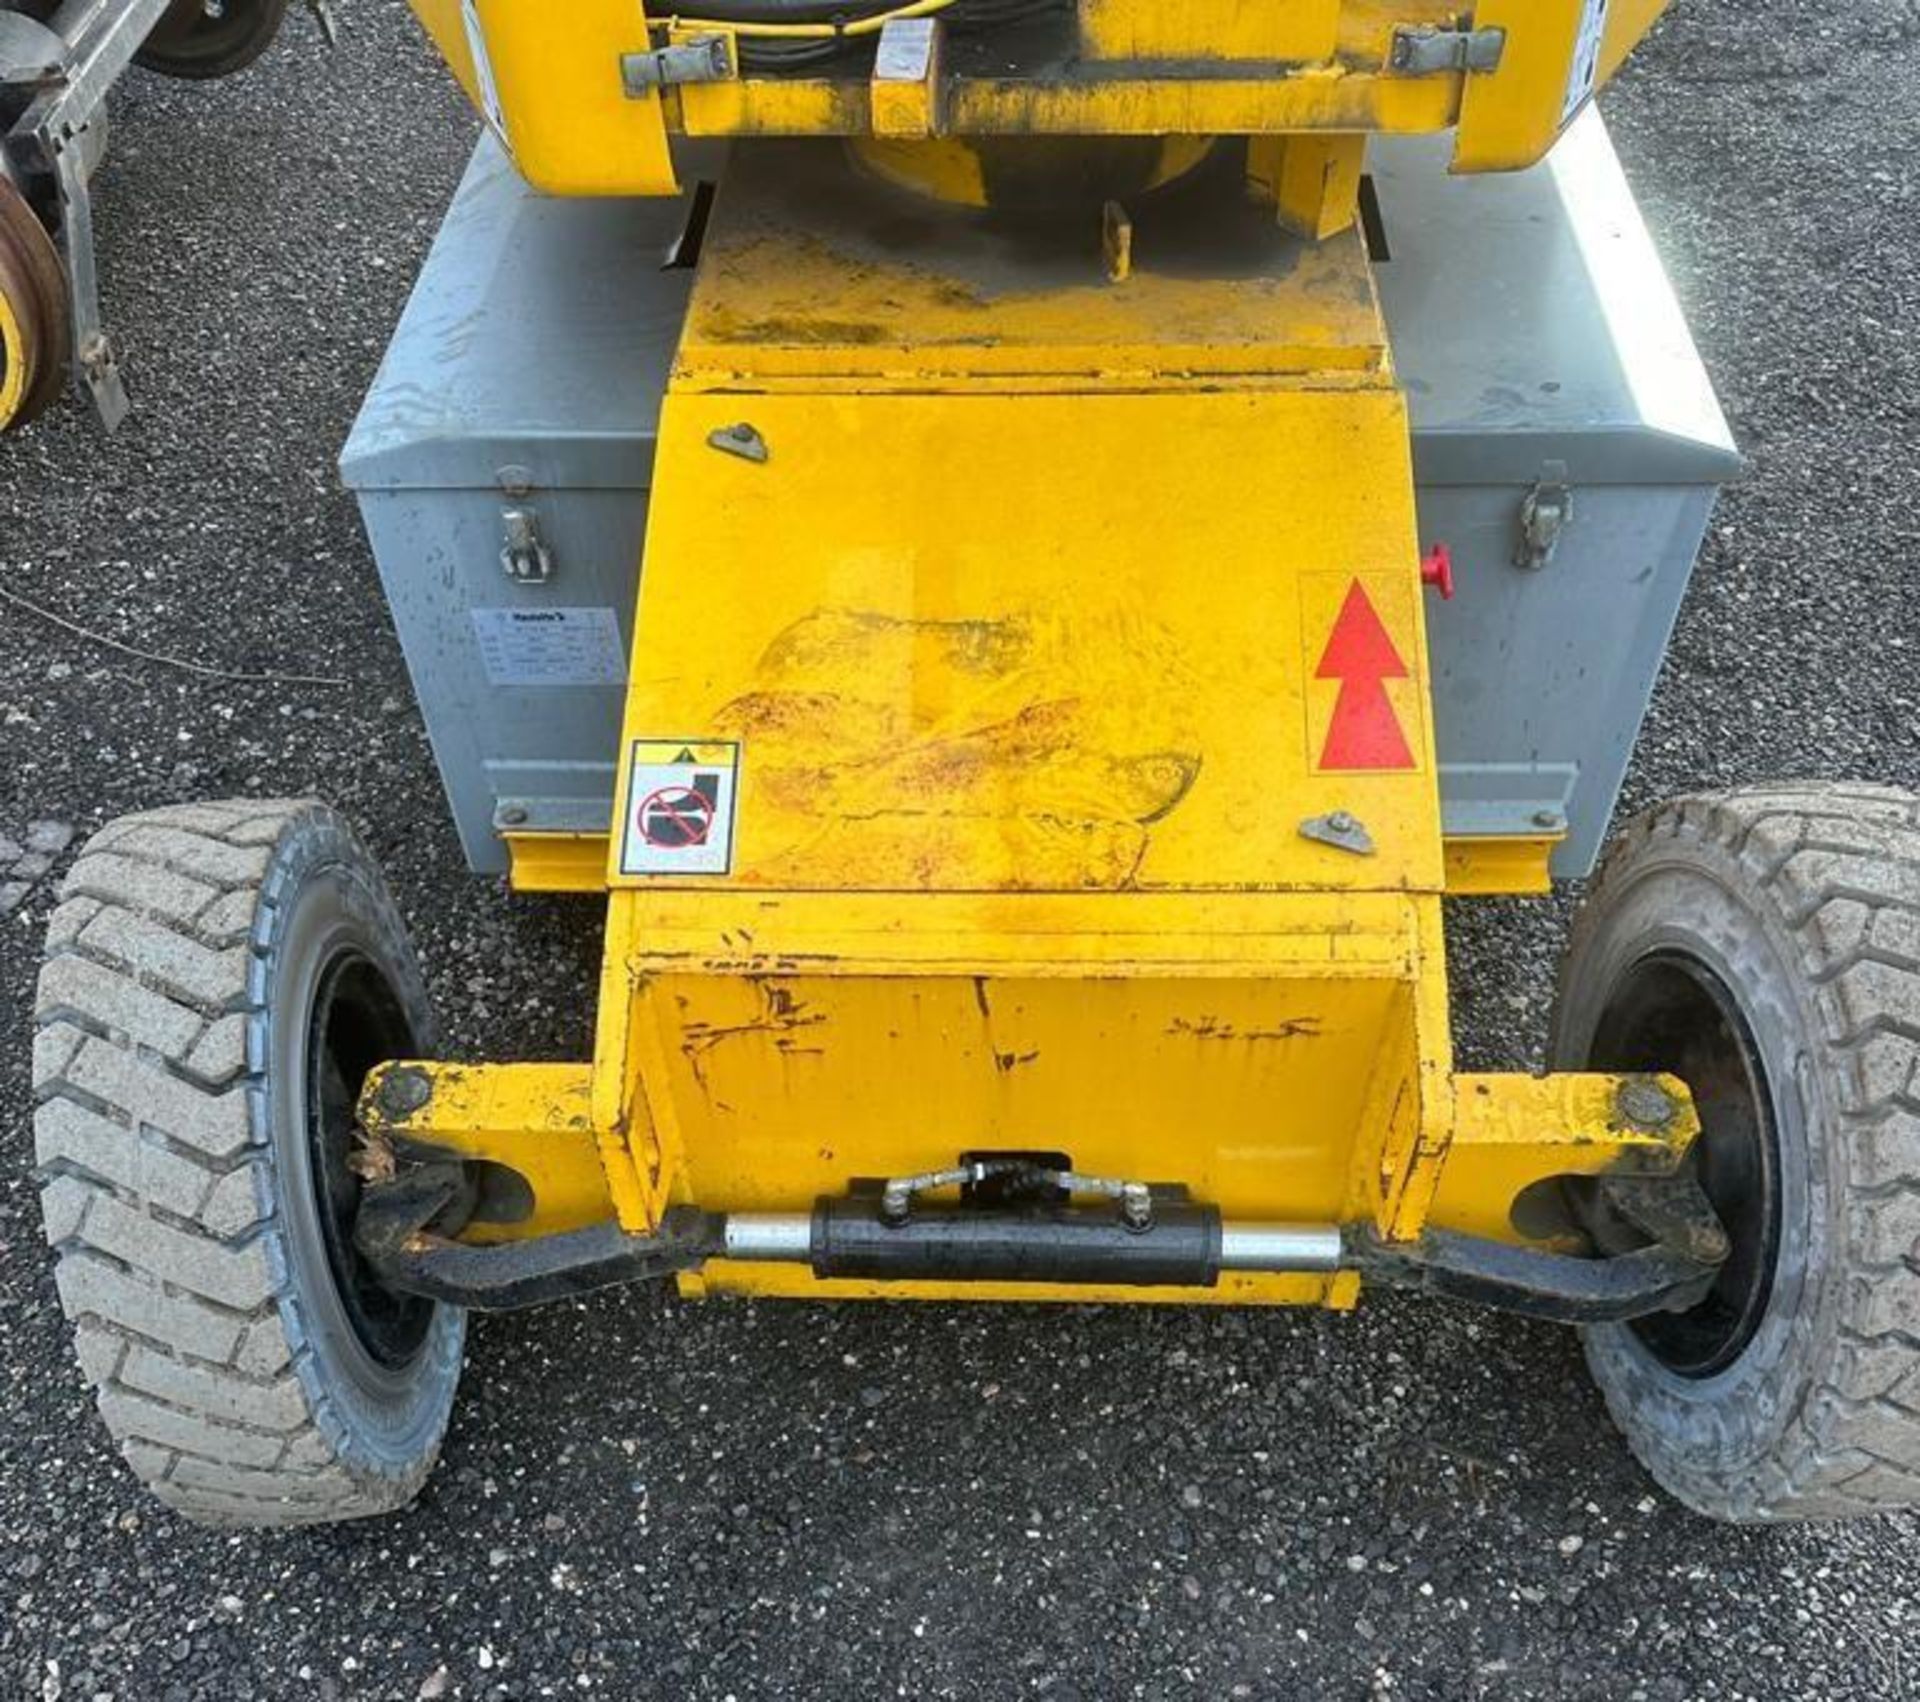 INDOOR HAULETTE HAISI 48V HA15 CHERRY PICKER APPROX 2000 HOURS BUILT IN 110/240V CHARGER 15 METRE - Image 10 of 10